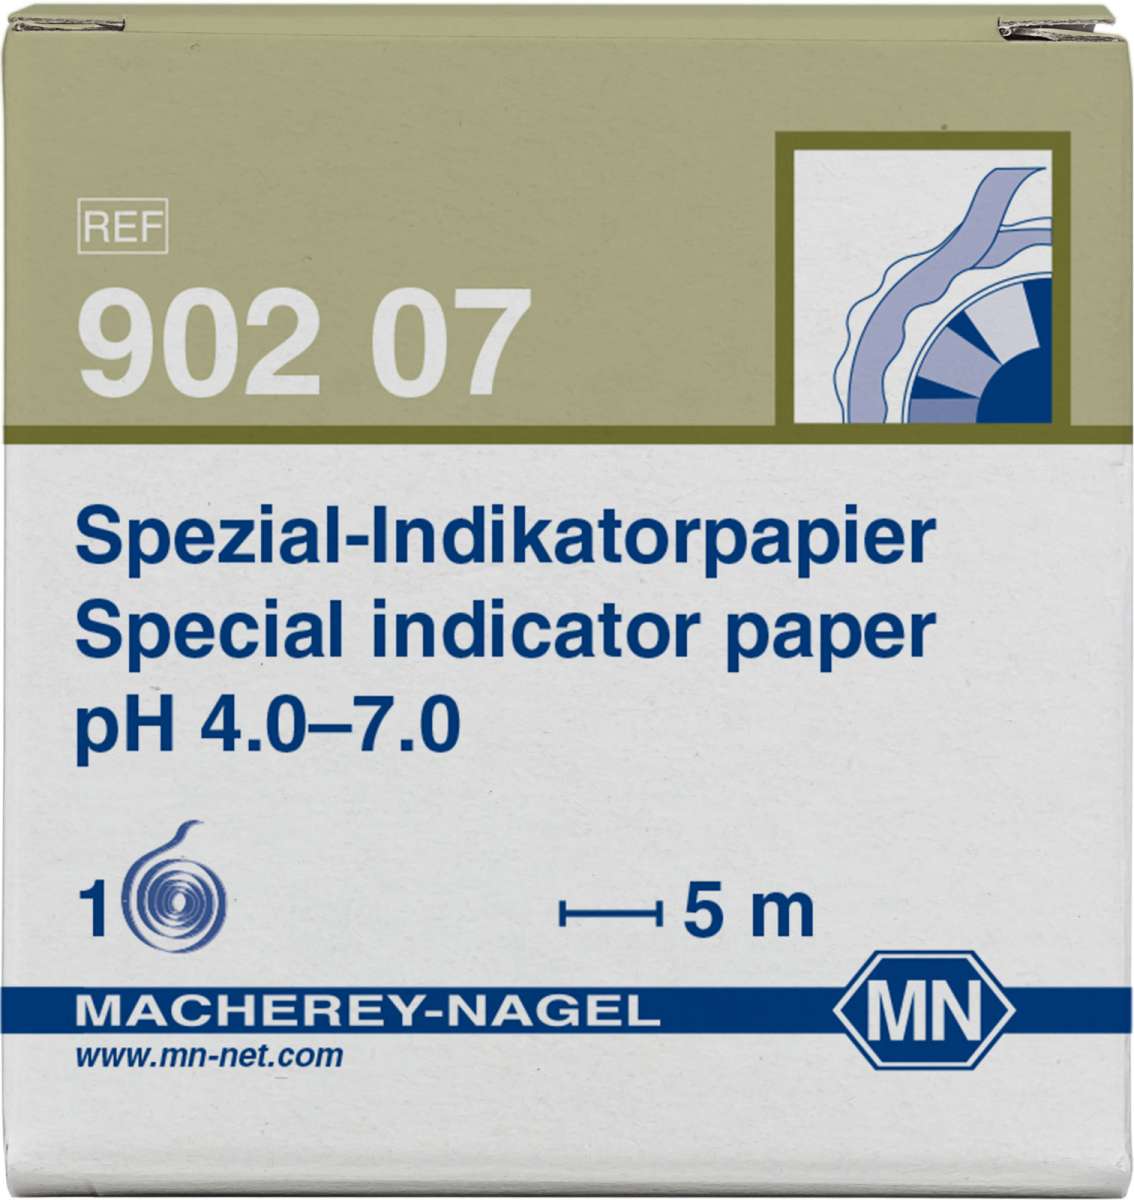 Special indicator paper pH 4.0 to 7.0 (Reel of 5m length and 7mm width)